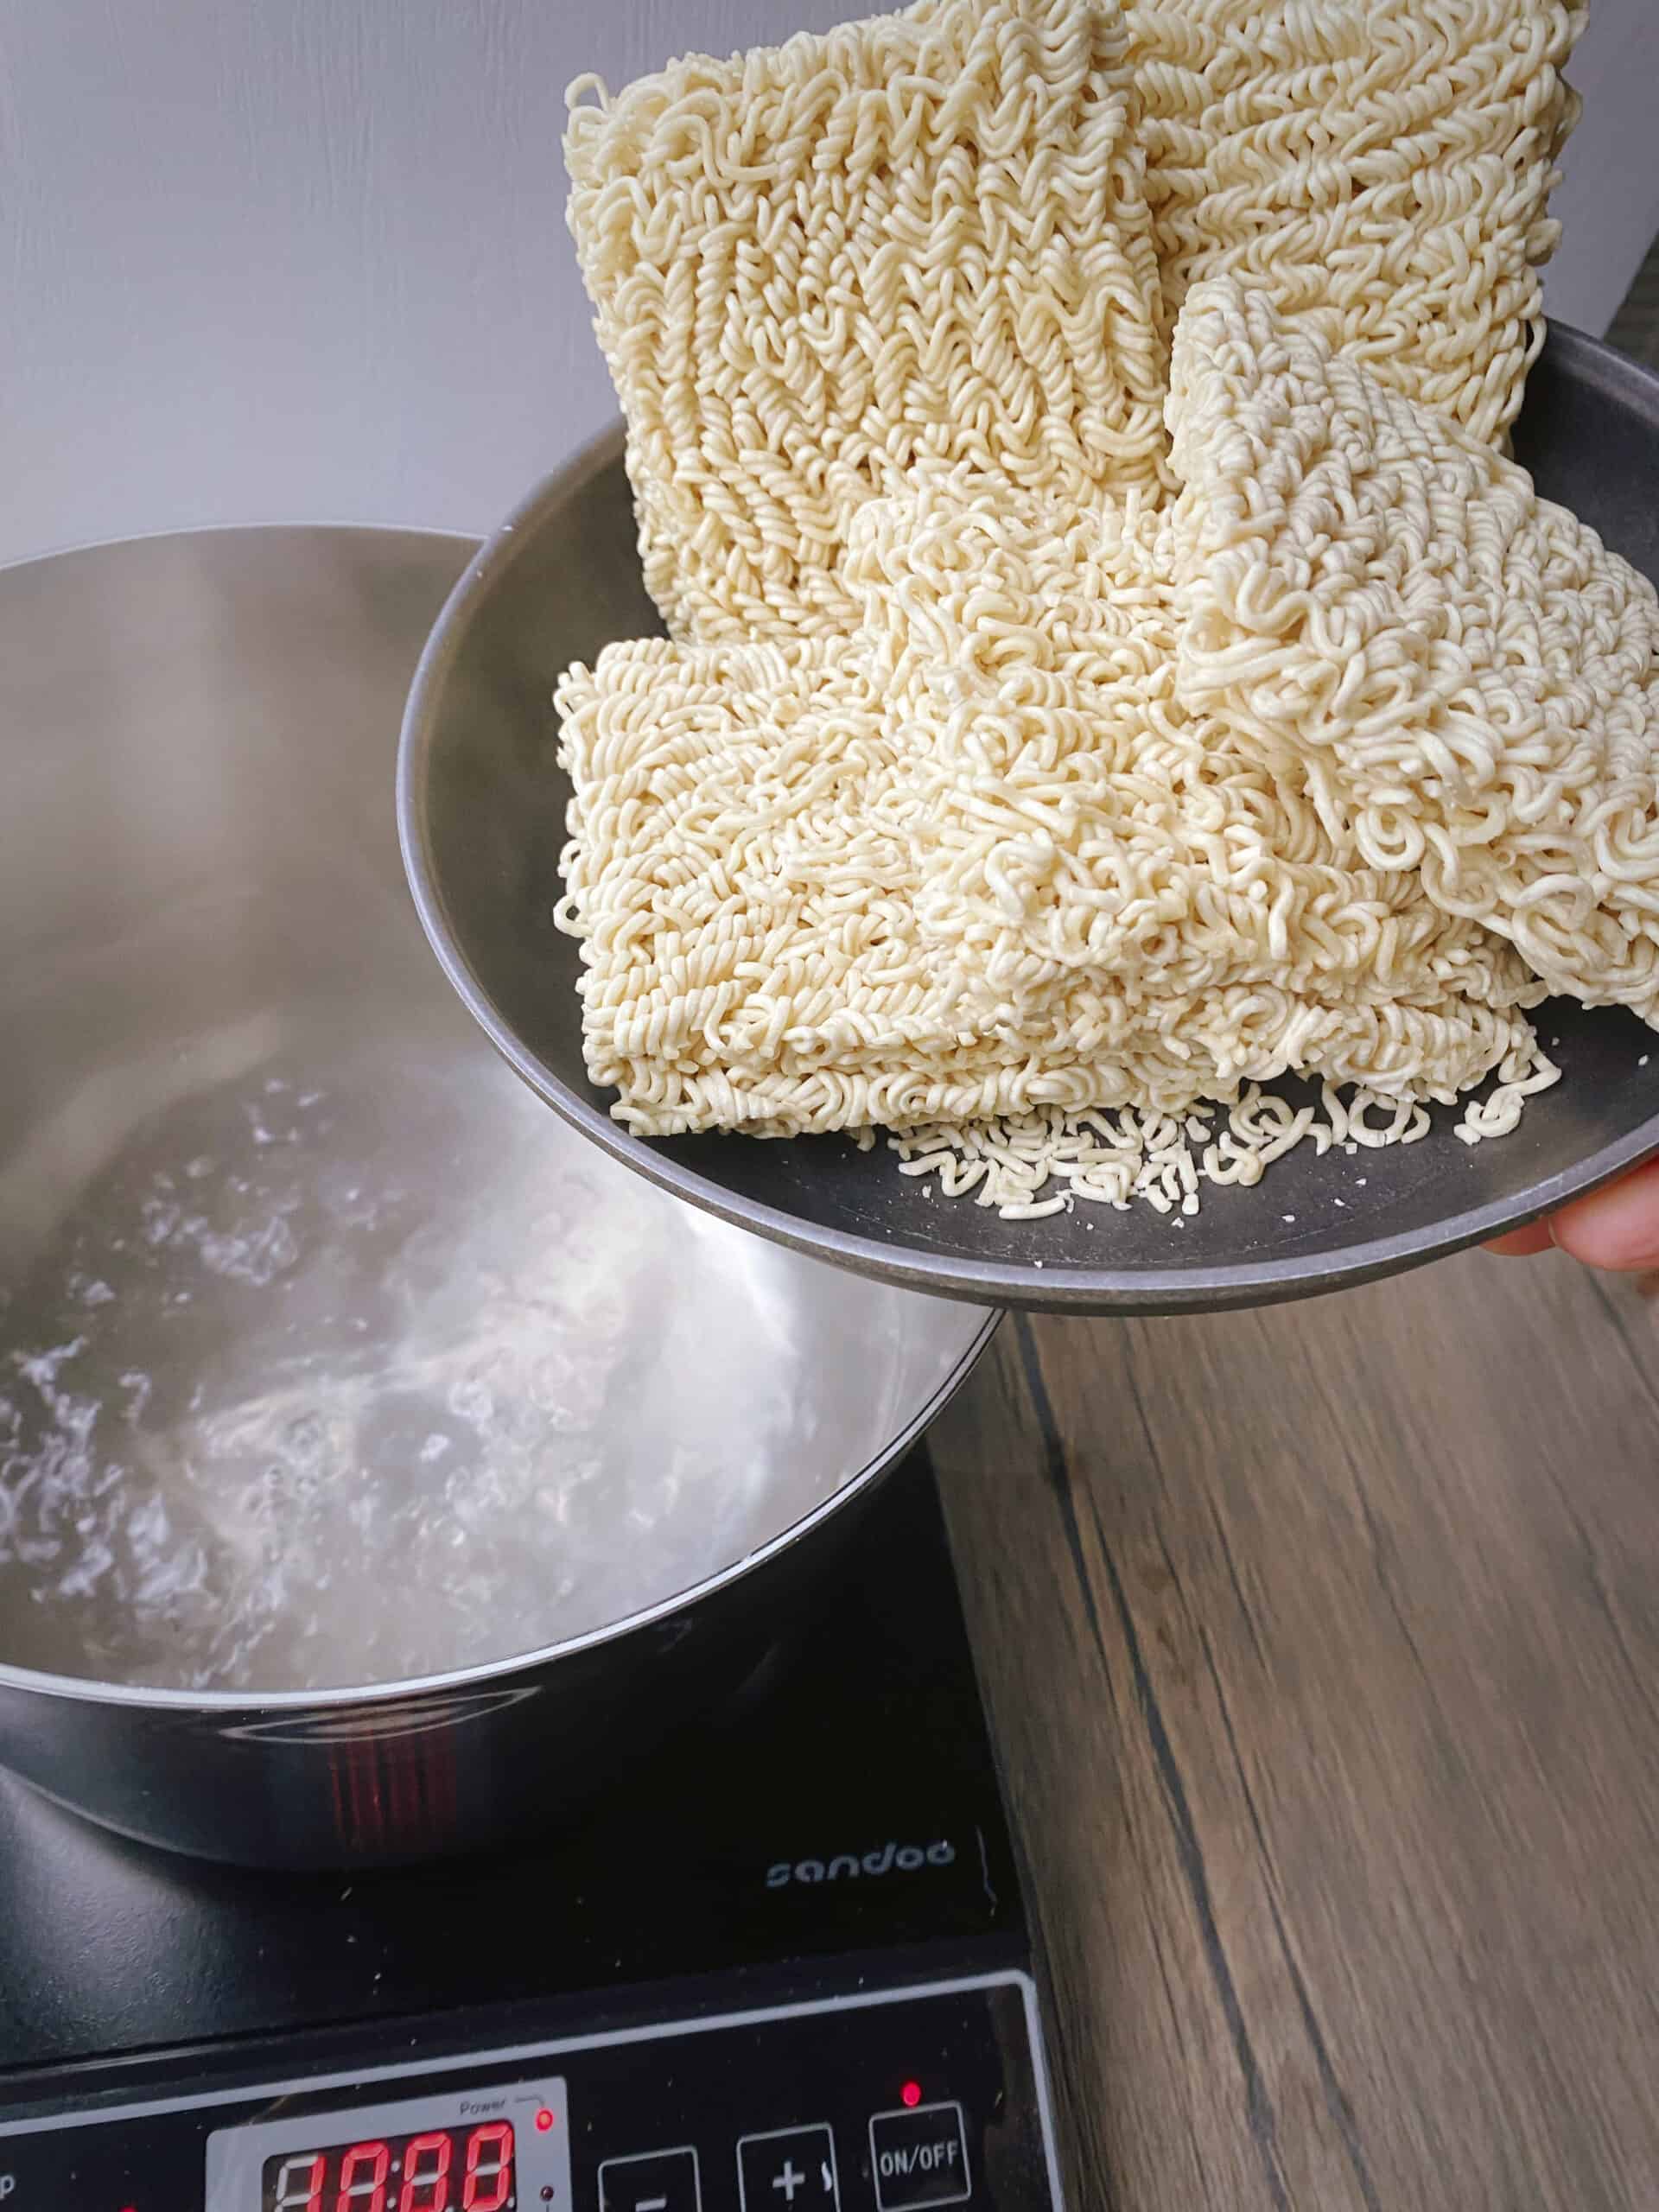 ramen noodles in a bowl about to be added to a pot of boiling water.